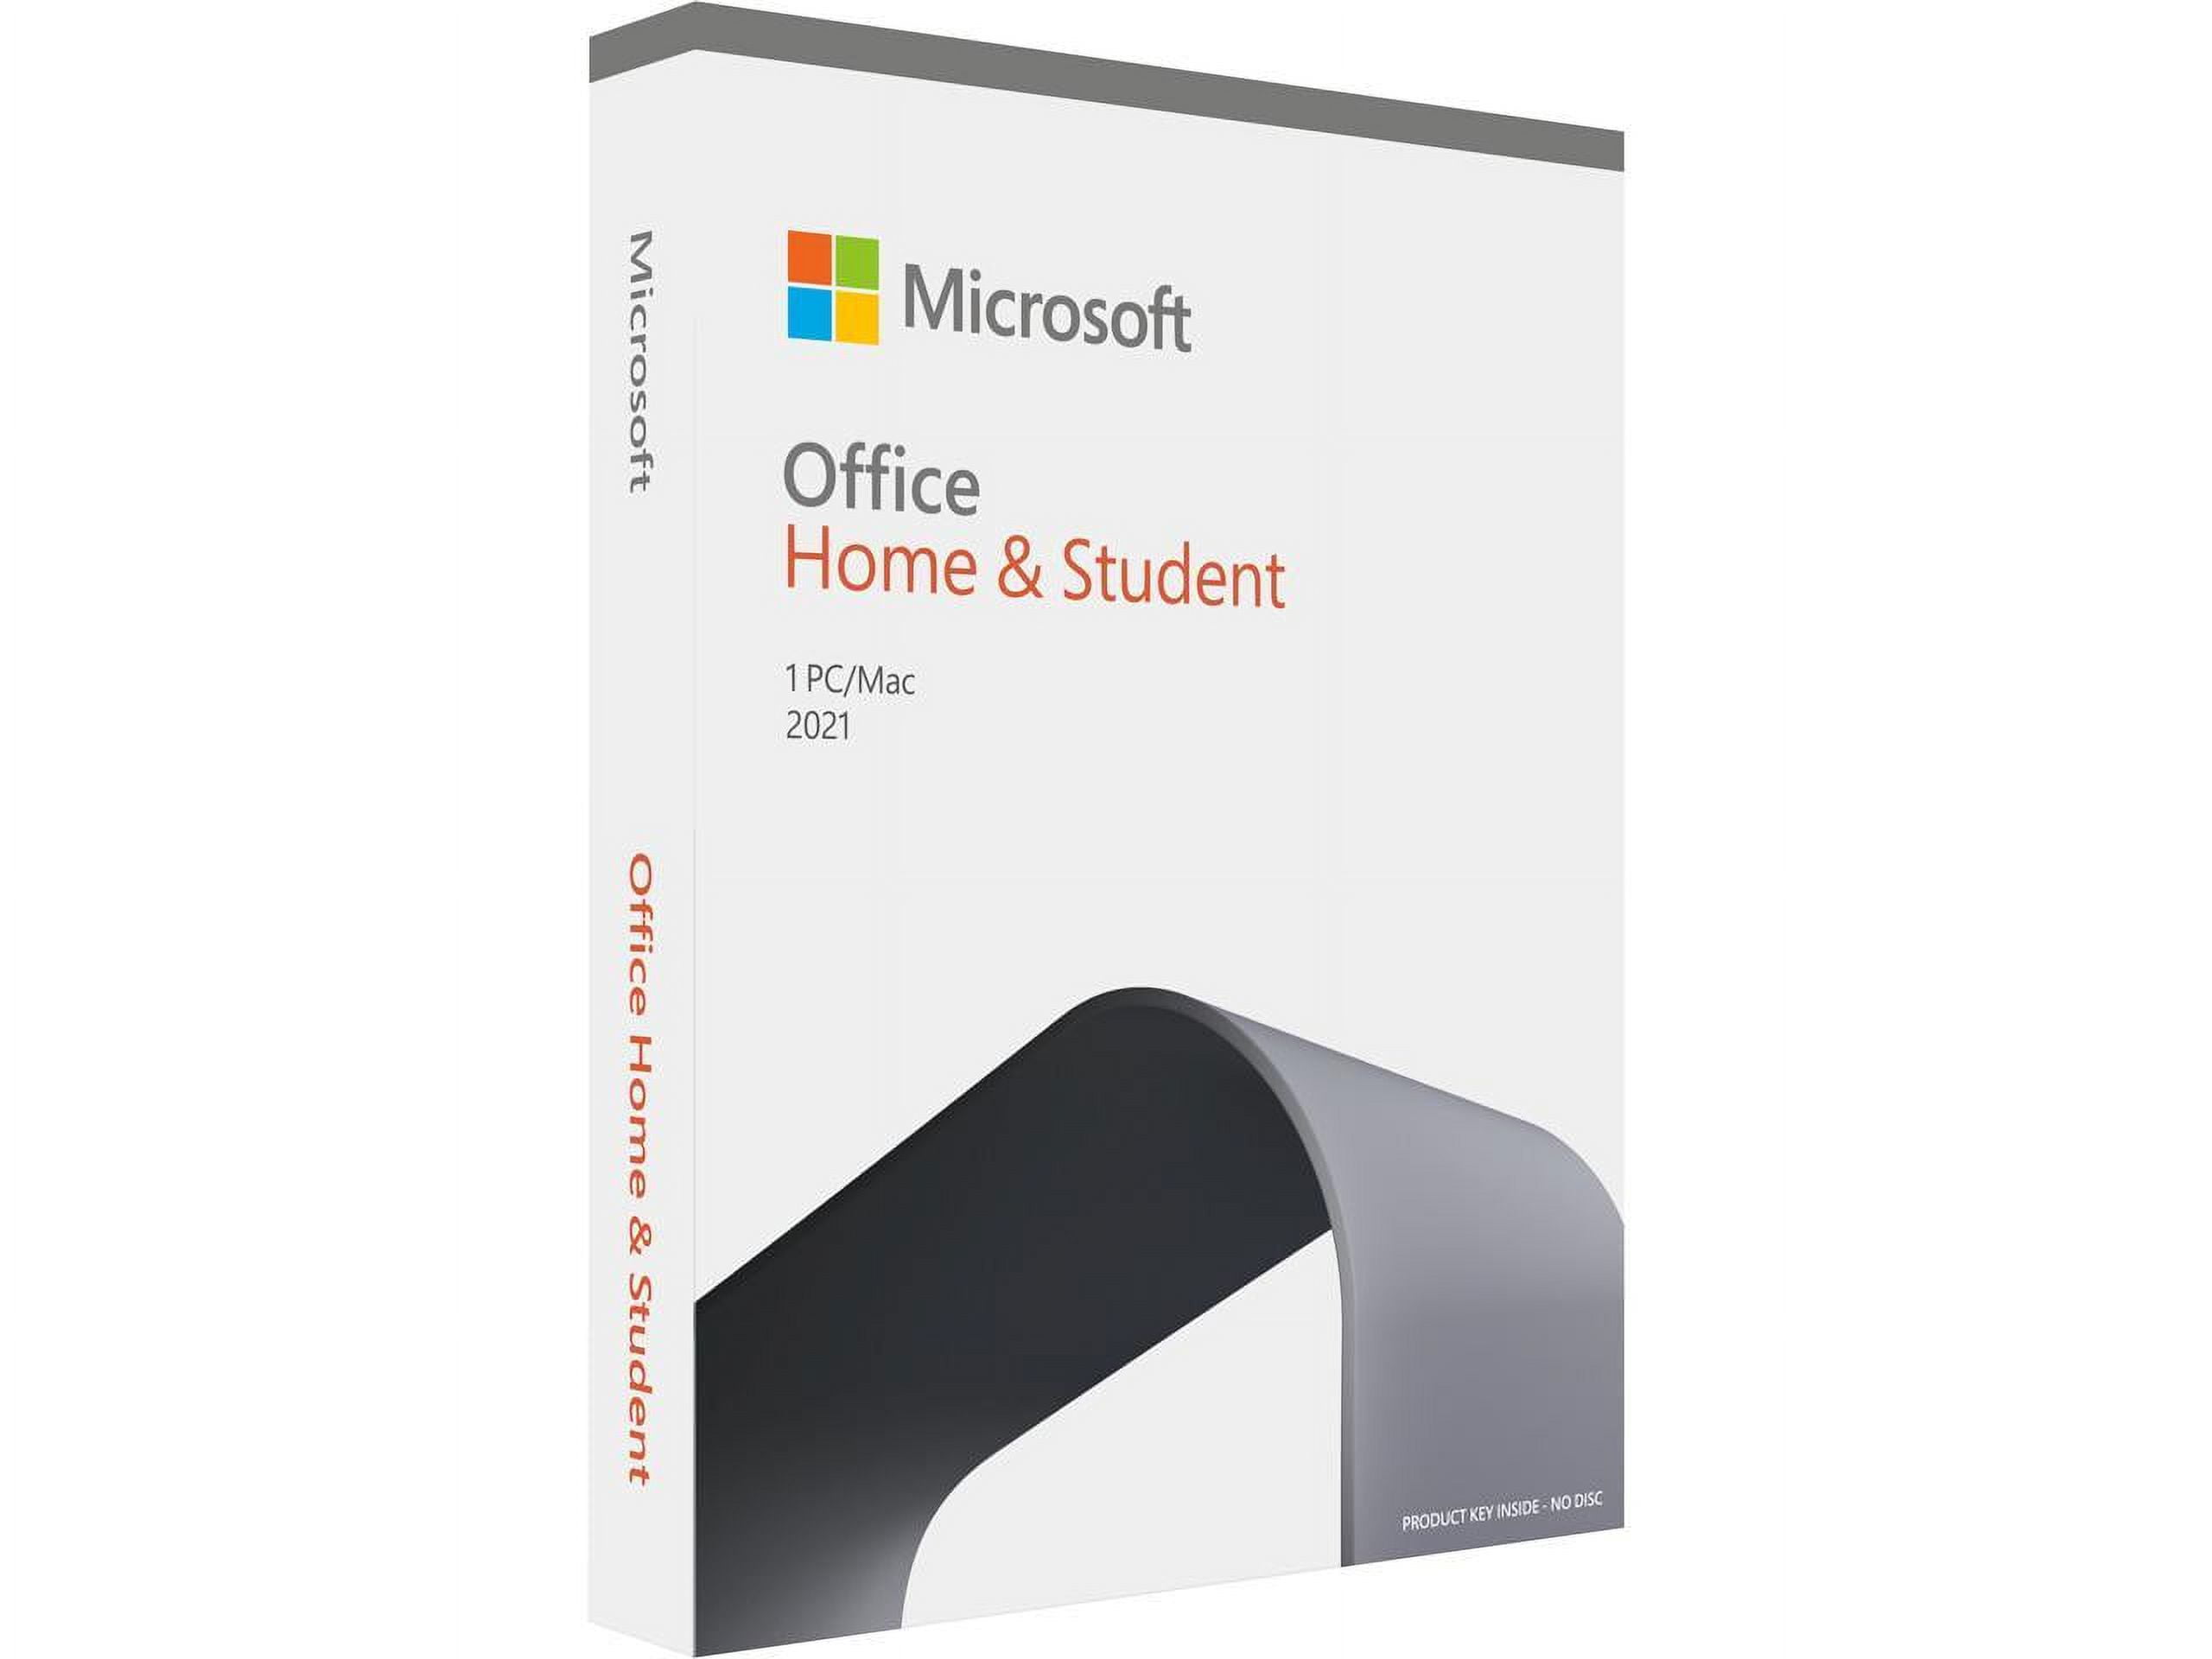 Microsoft Office Home and Business 2019 - box pack - 1 PC/Mac